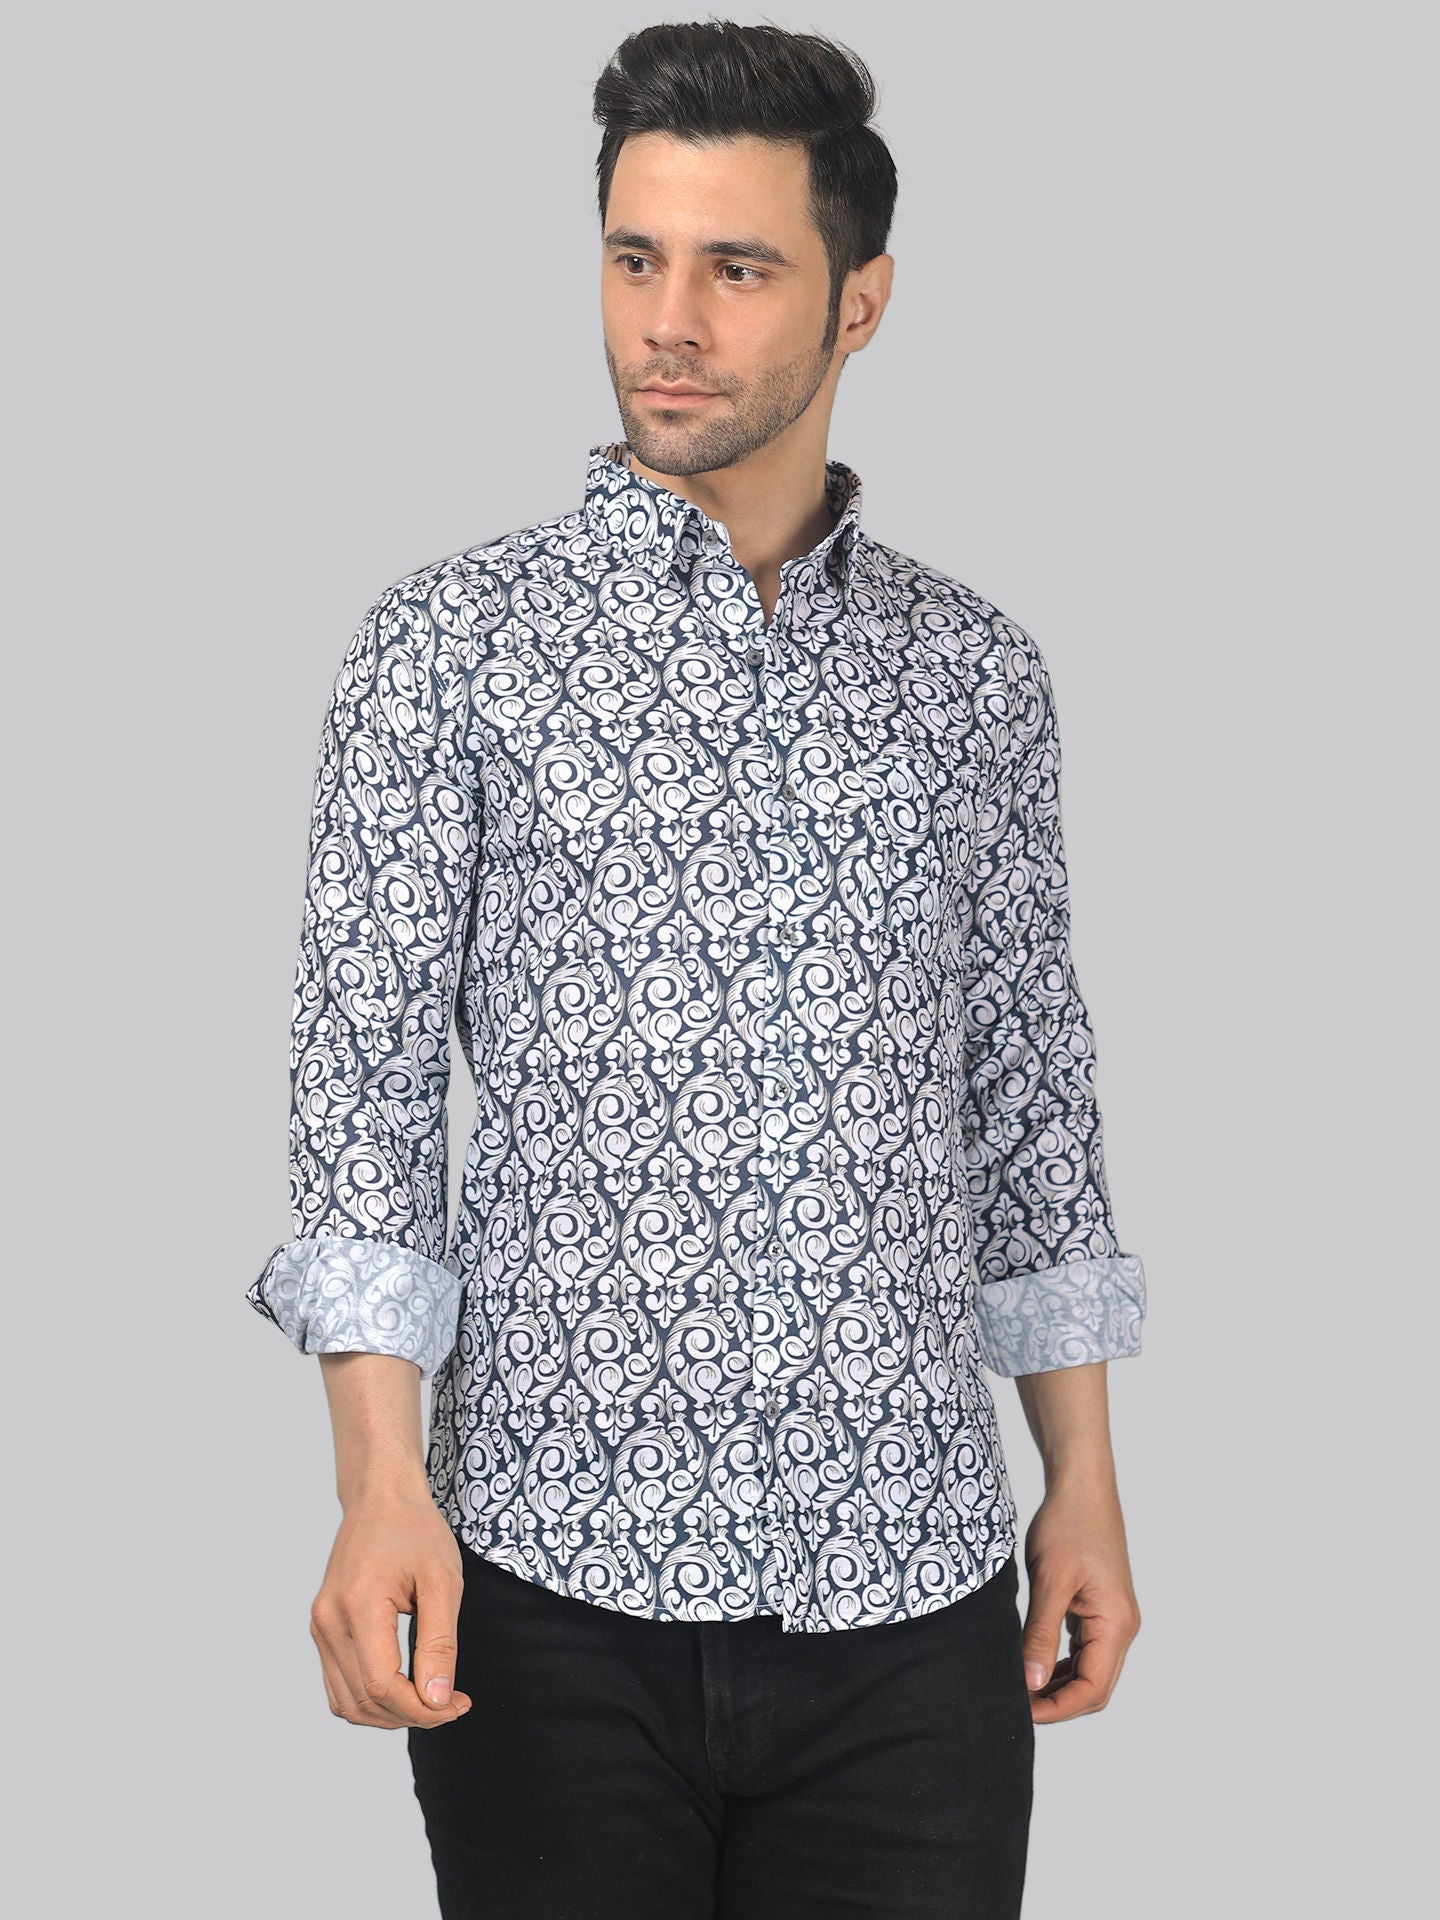 Edgy-glam Men's Printed Full Sleeve Casual Linen Shirt - TryBuy® USA🇺🇸